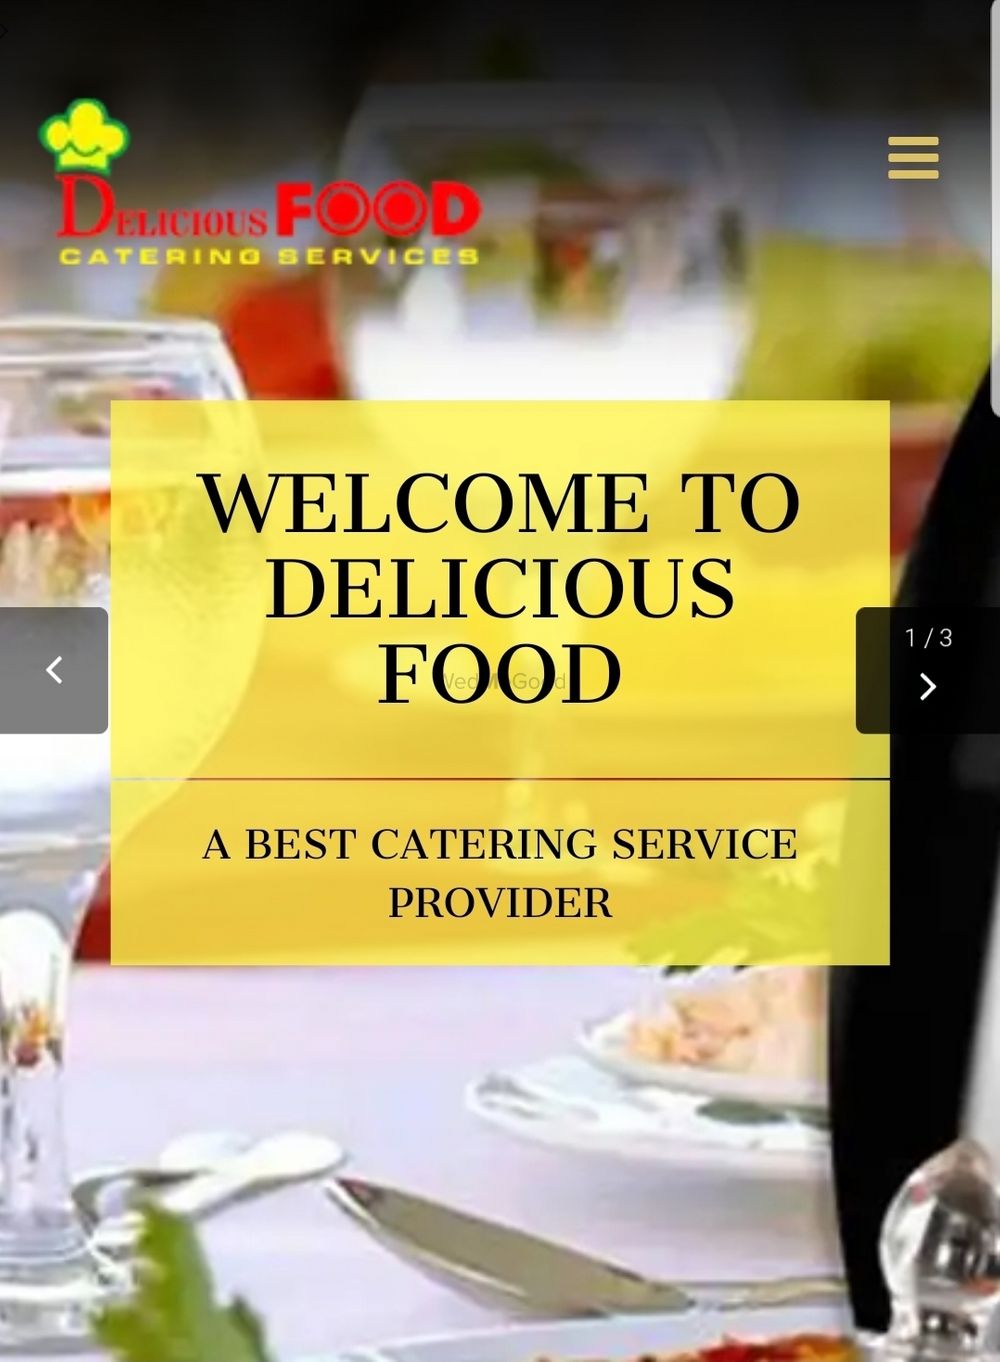 Photo By Delicious Food Catering Service - Catering Services